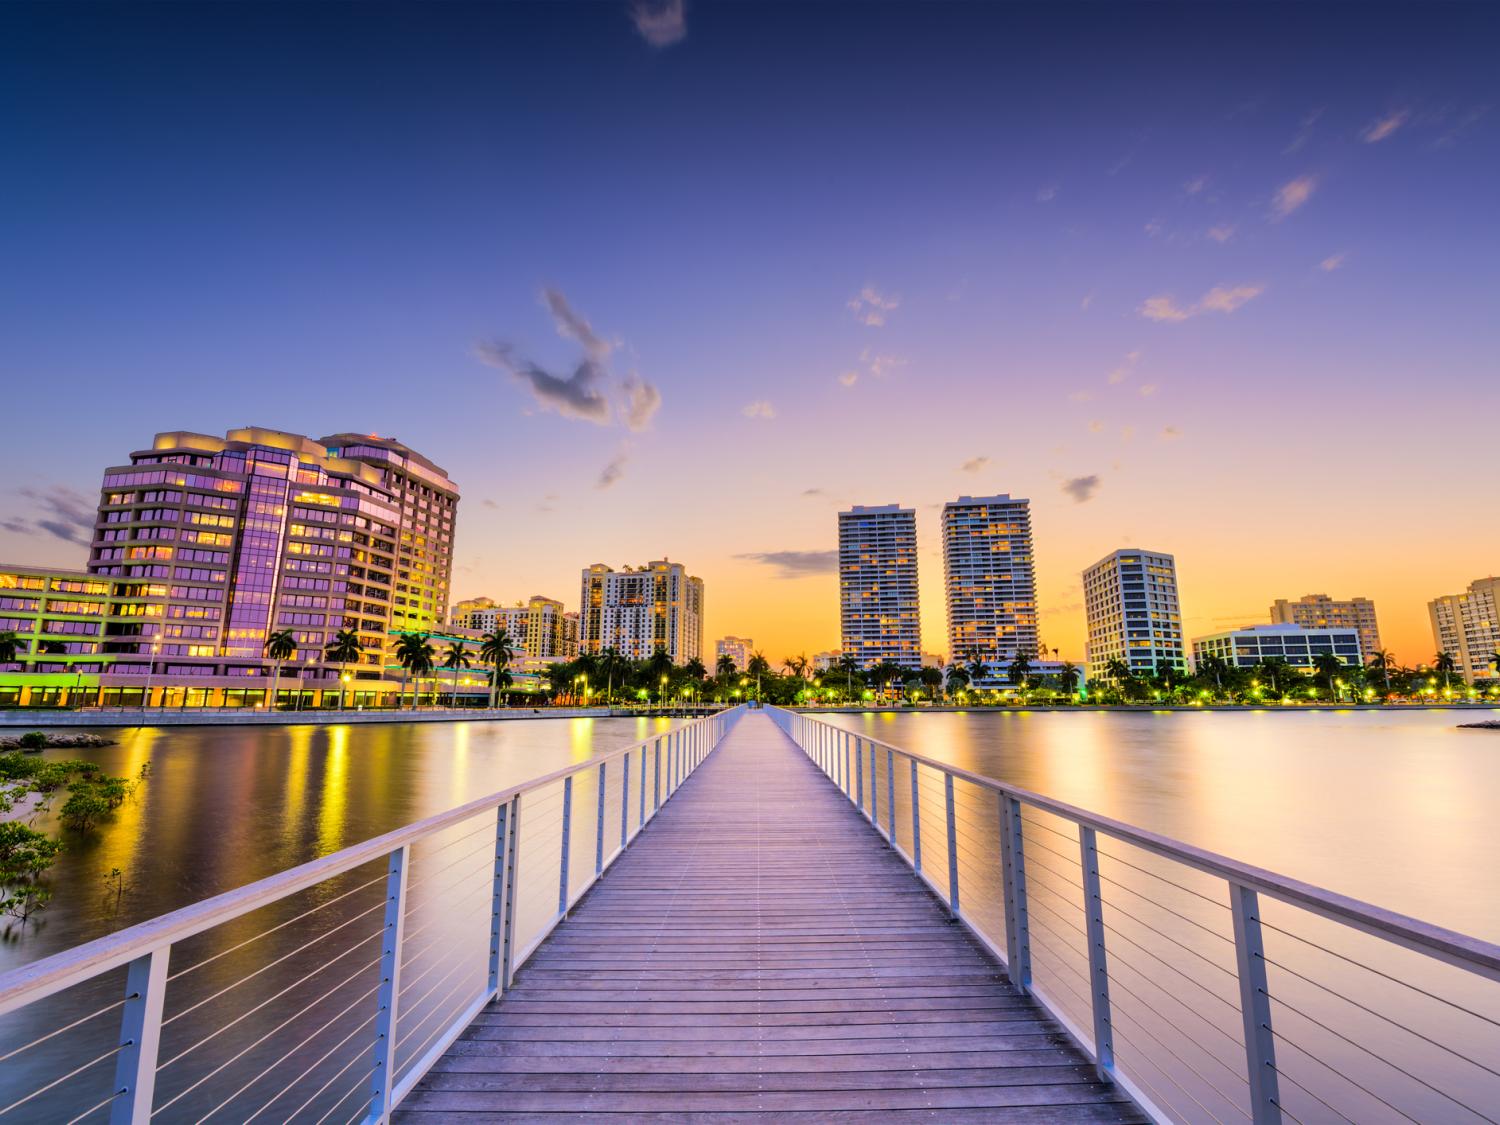 Downtown skyline of West Palm Beach, Florida, pictured at dusk from the intracoastal waterway.